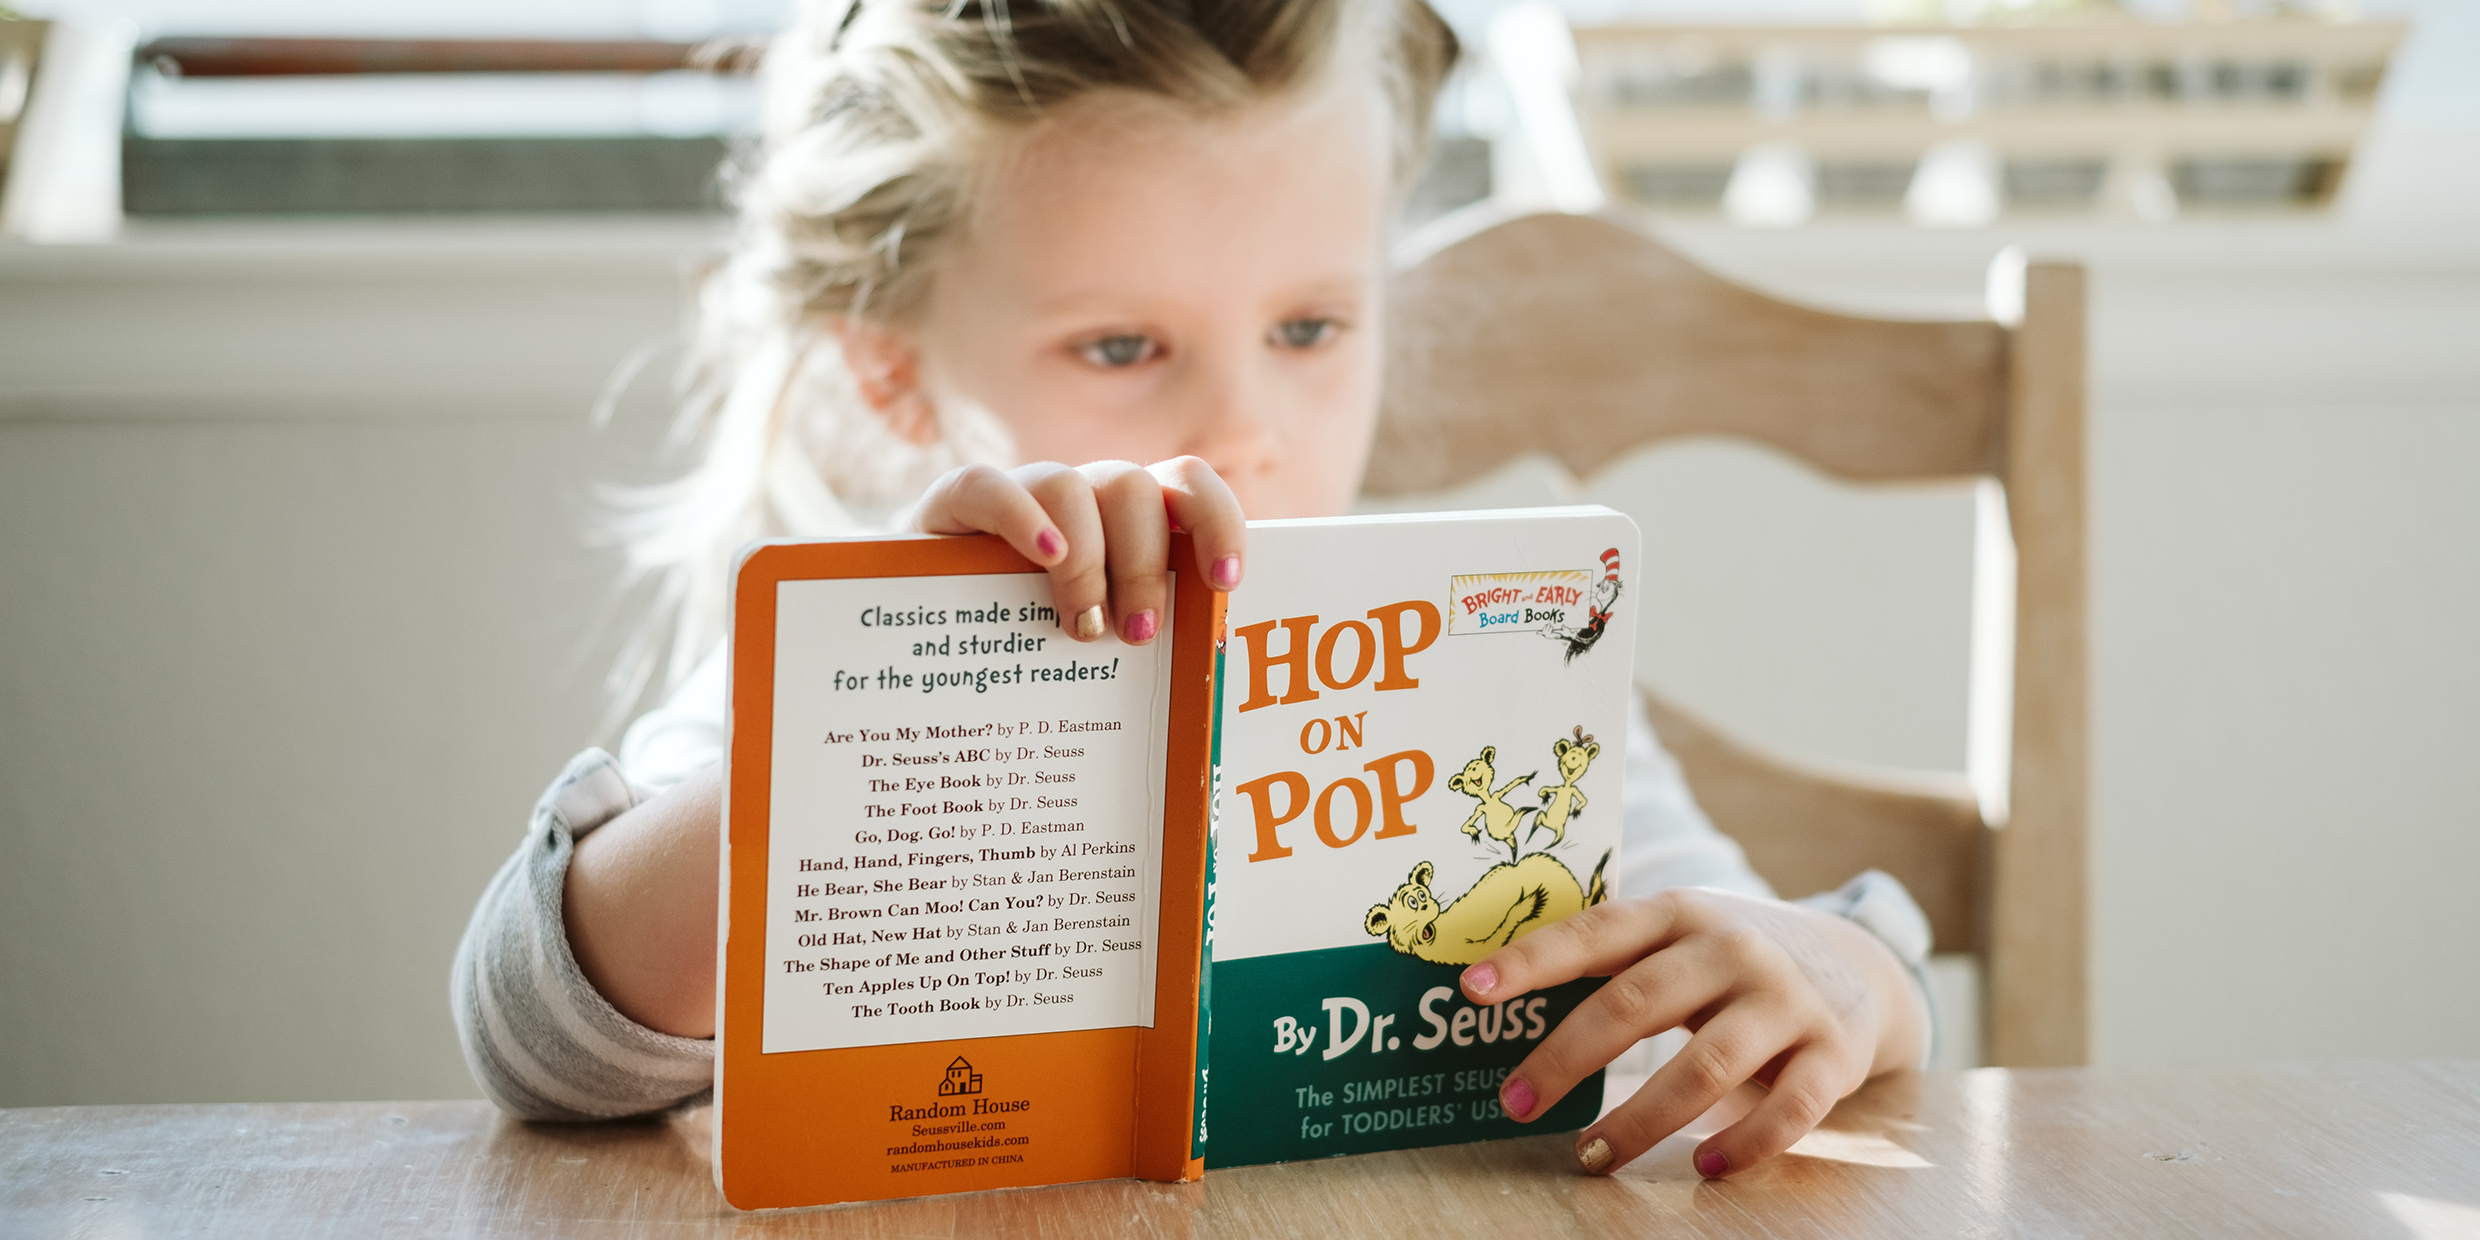 Image of a child reading a book by Dr. Seuss